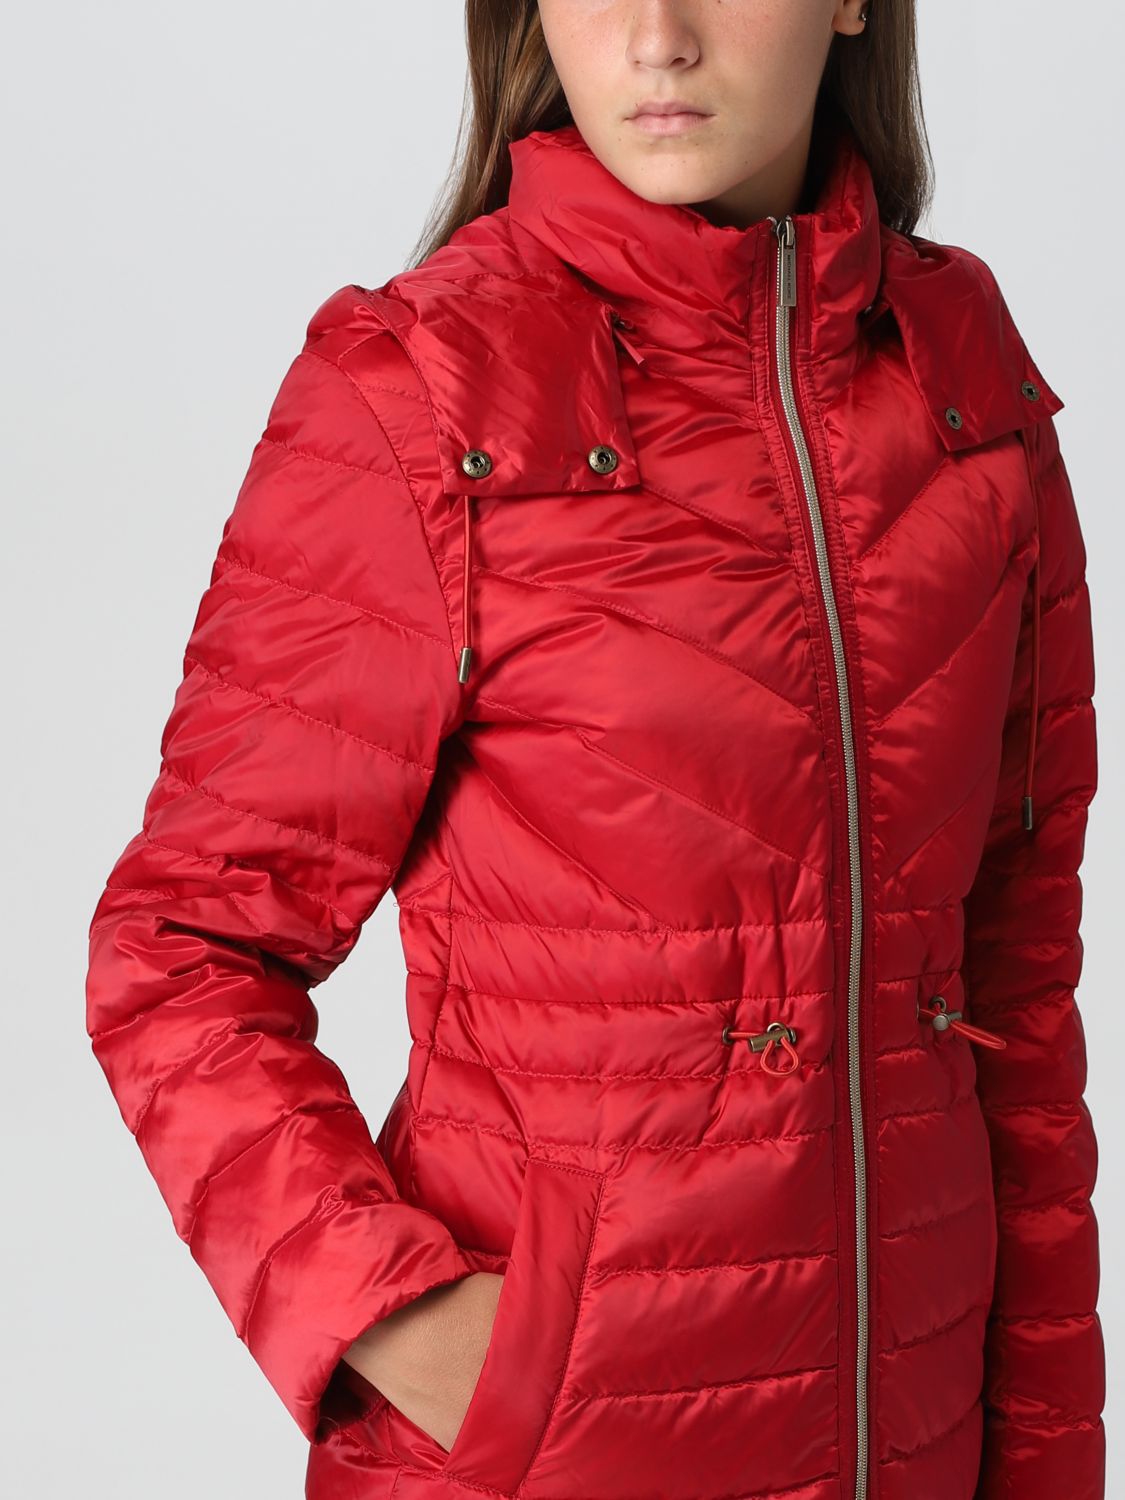 Michael Kors Outlet jacket for woman  Red  Michael Kors jacket  MU2207447X online on GIGLIOCOM